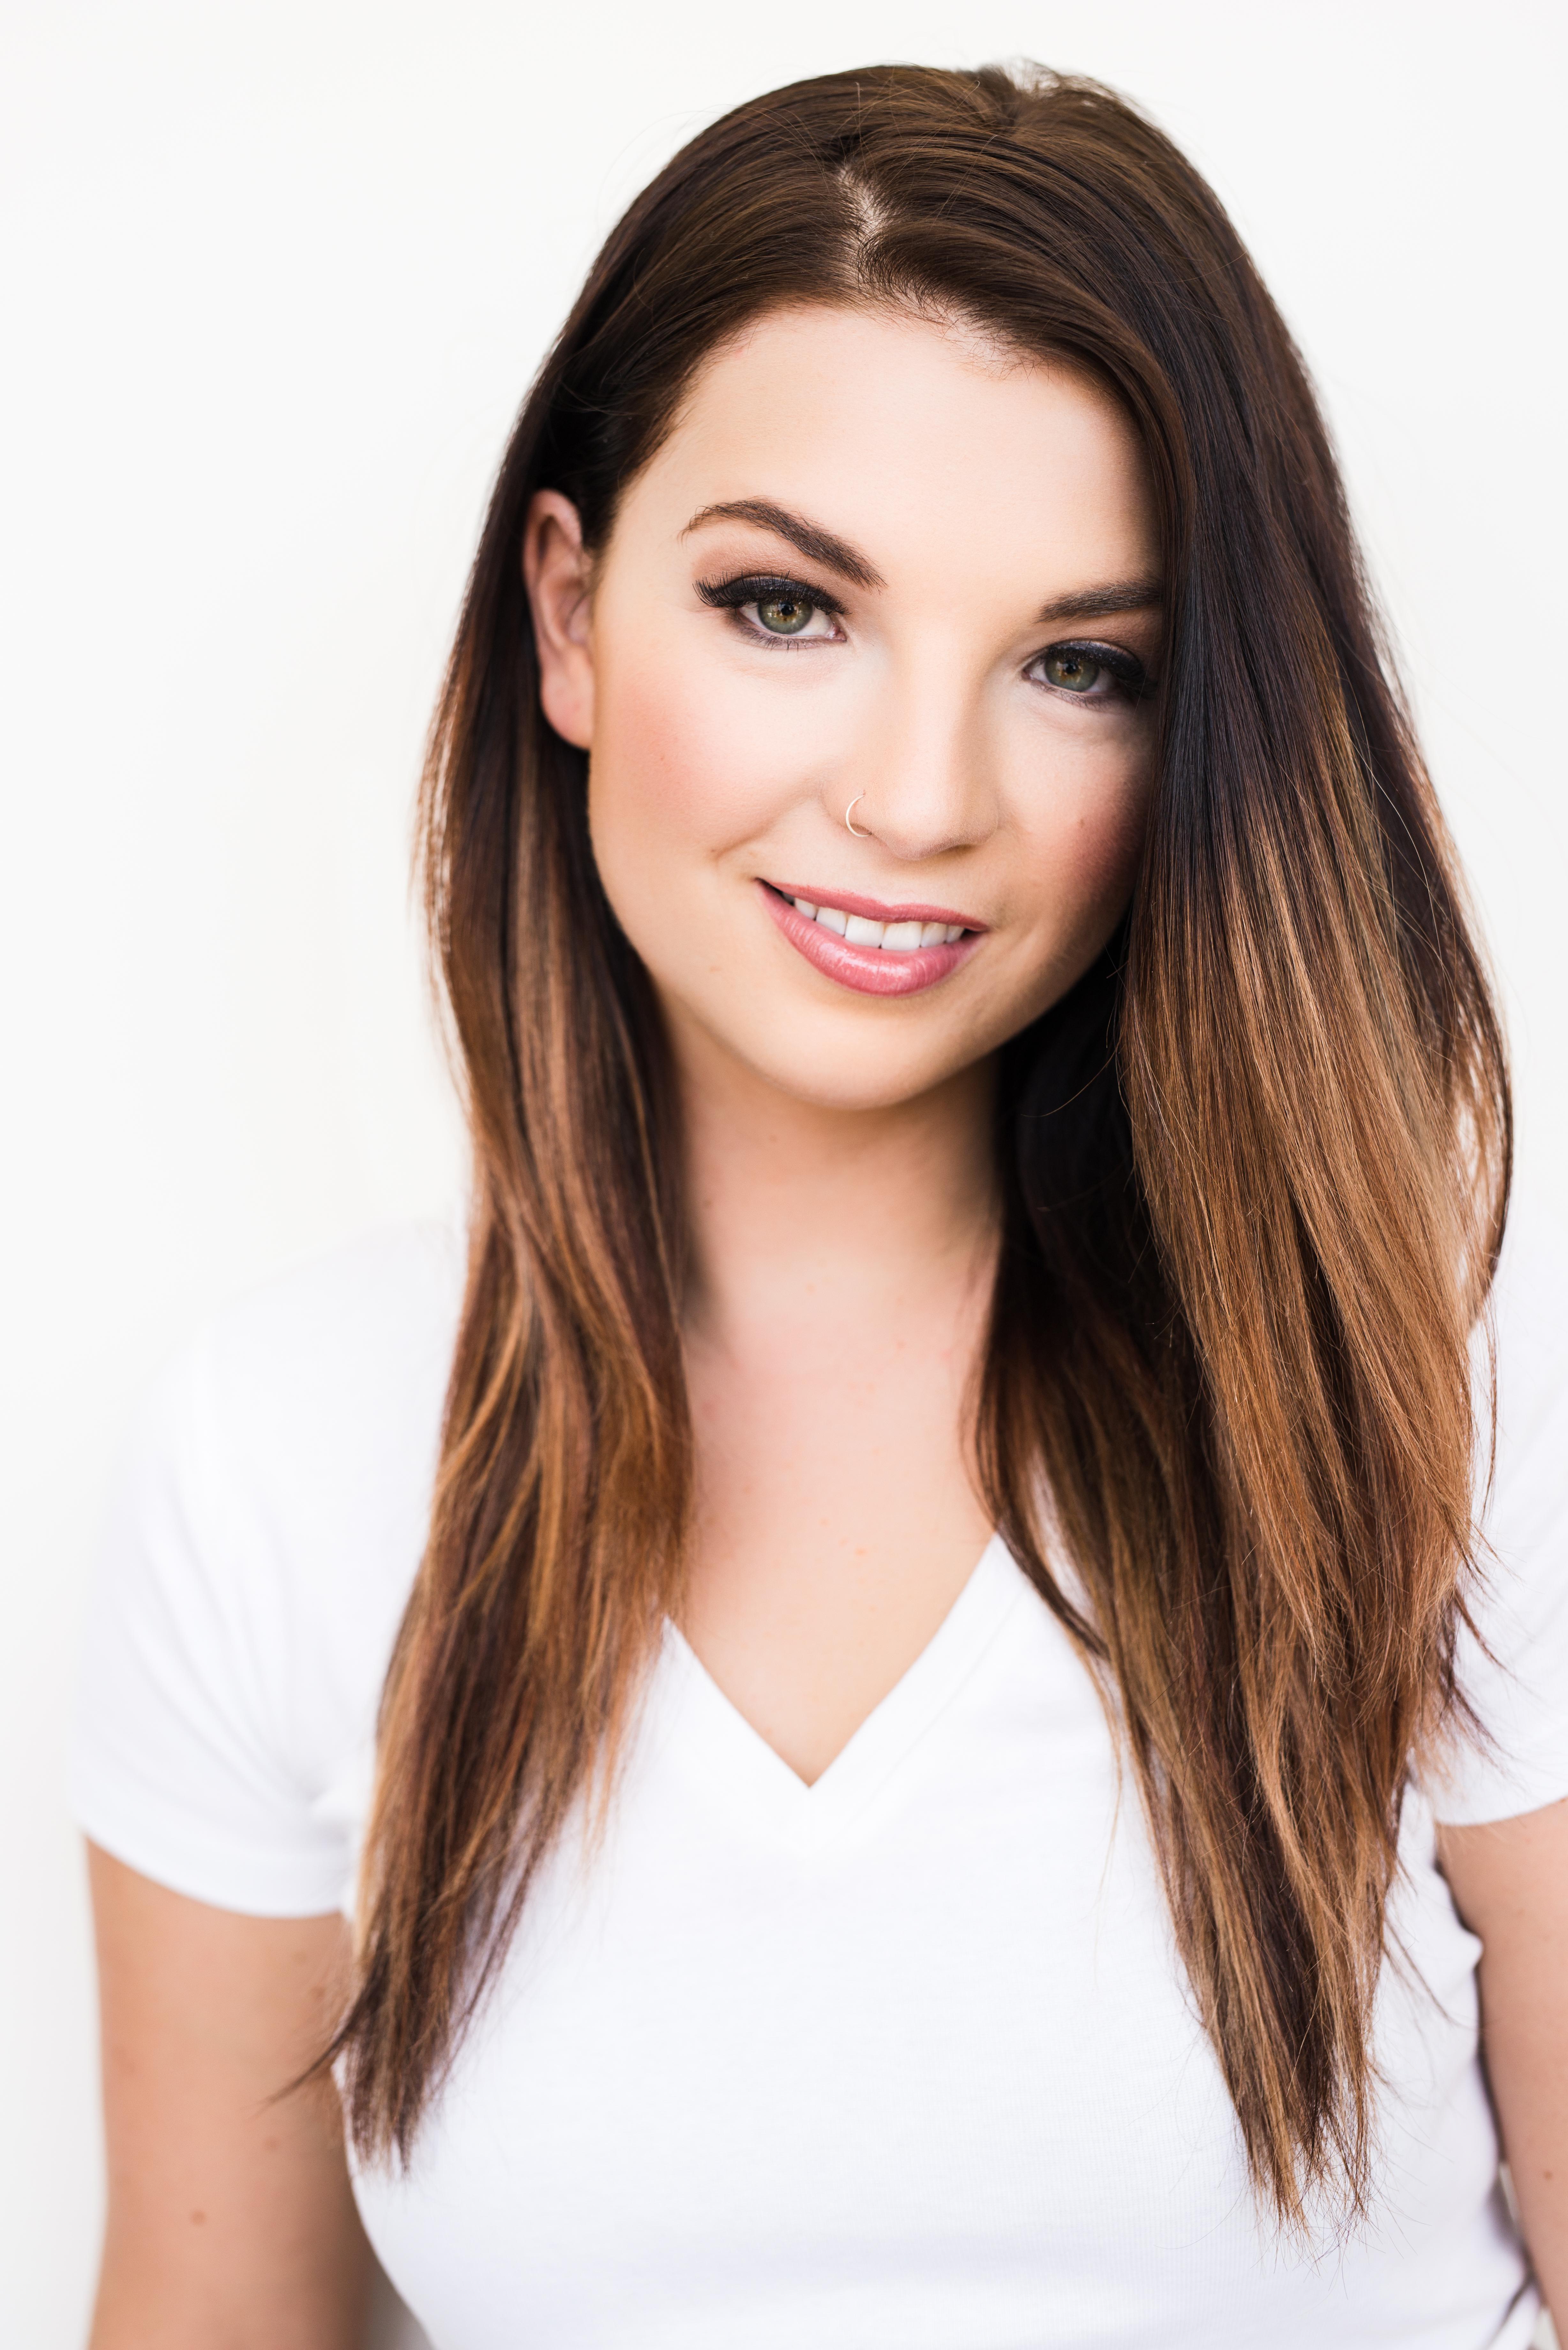 COUNTRY STRONG – Singer Jess Moskaluke is excited to be joining Paul Brandt and Dean Brody on their current tour which makes a Red Deer stop Oct. 6th at the Centrium.